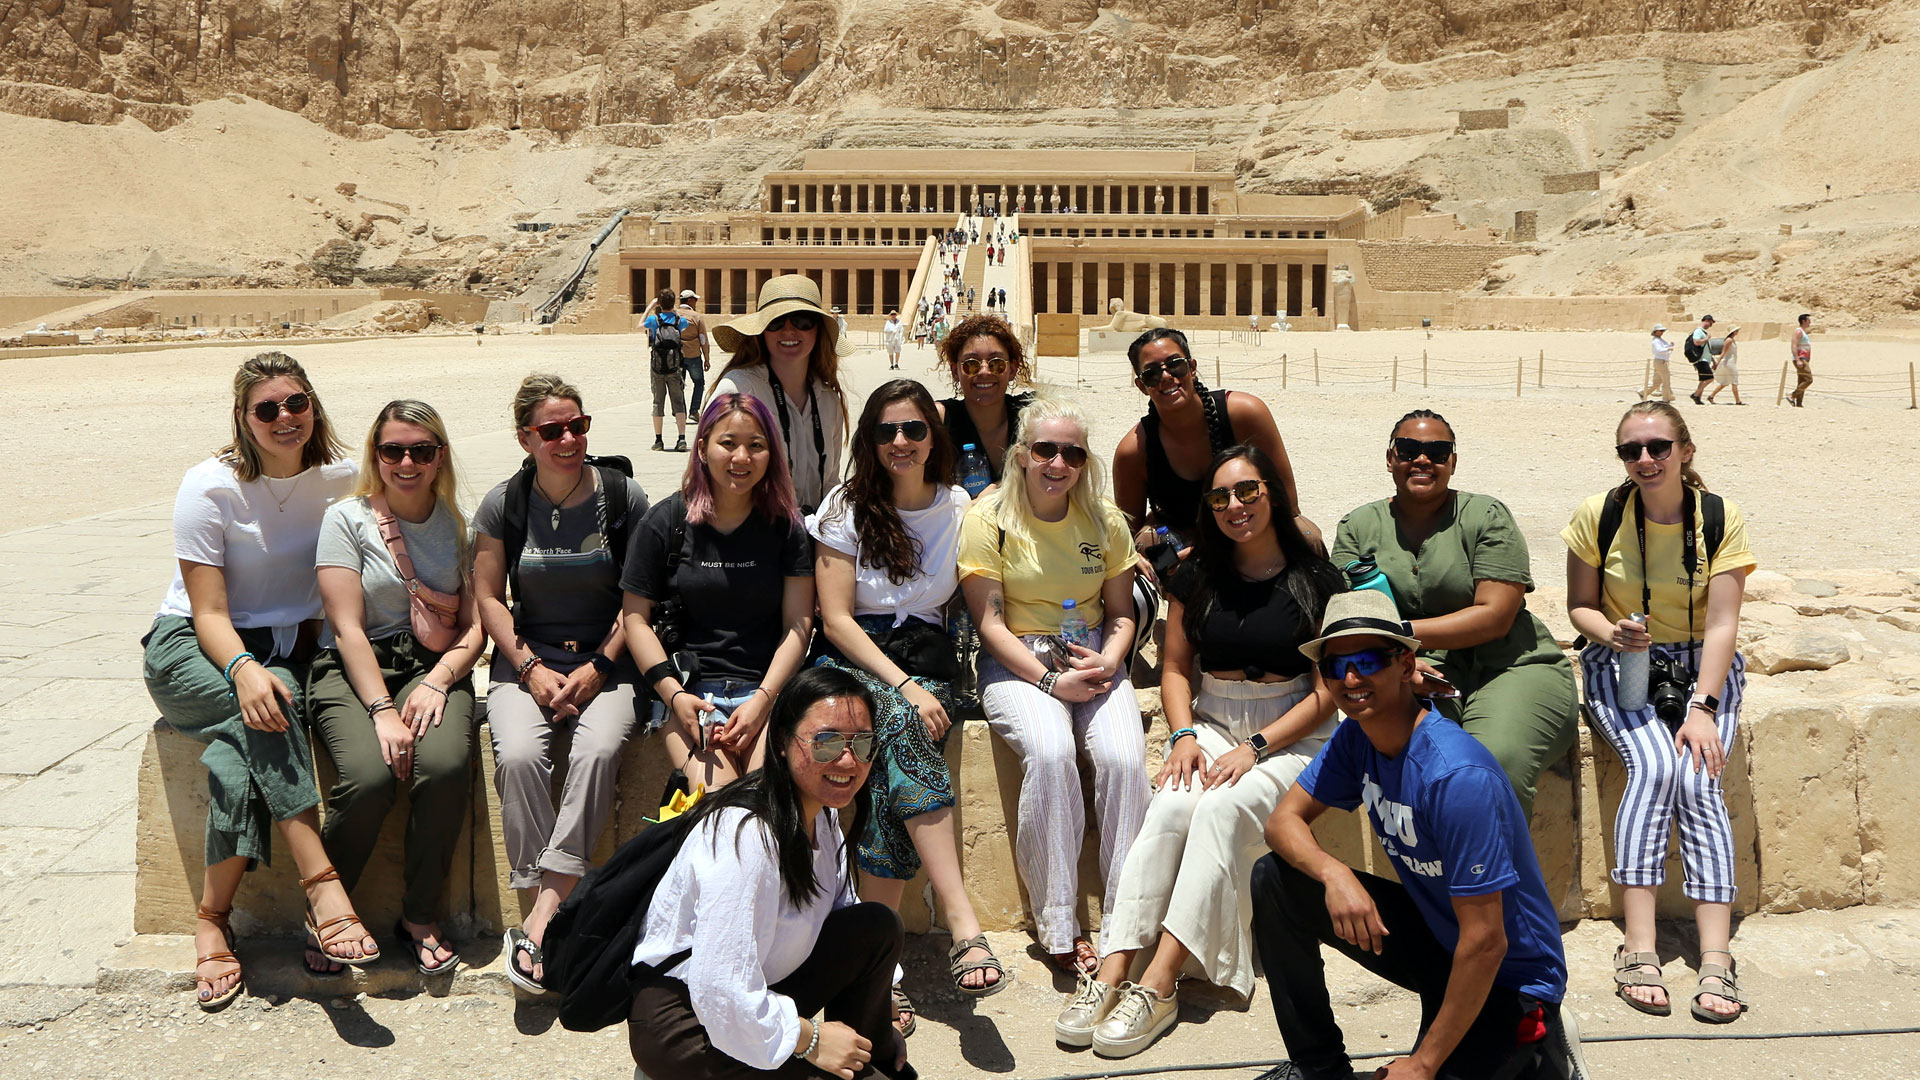 Group portrait in front of the temple.